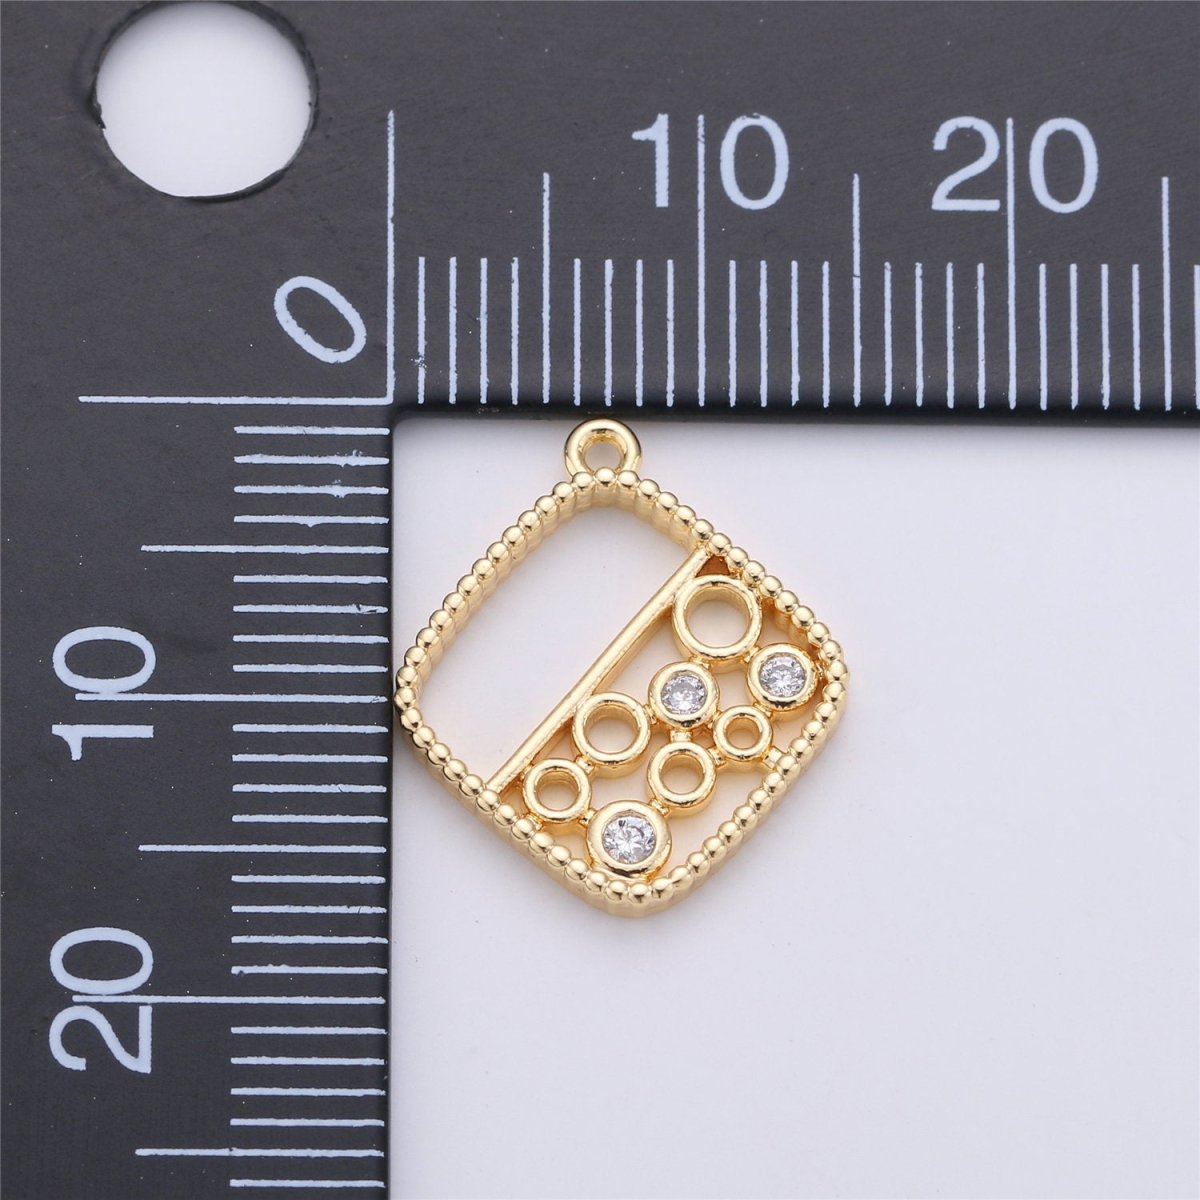 Dainty Geometric Charm Gold Square Charm with Bubble Circle in Cubic Charm for Necklace Earring Bracelet Charm supply, K-146 - DLUXCA